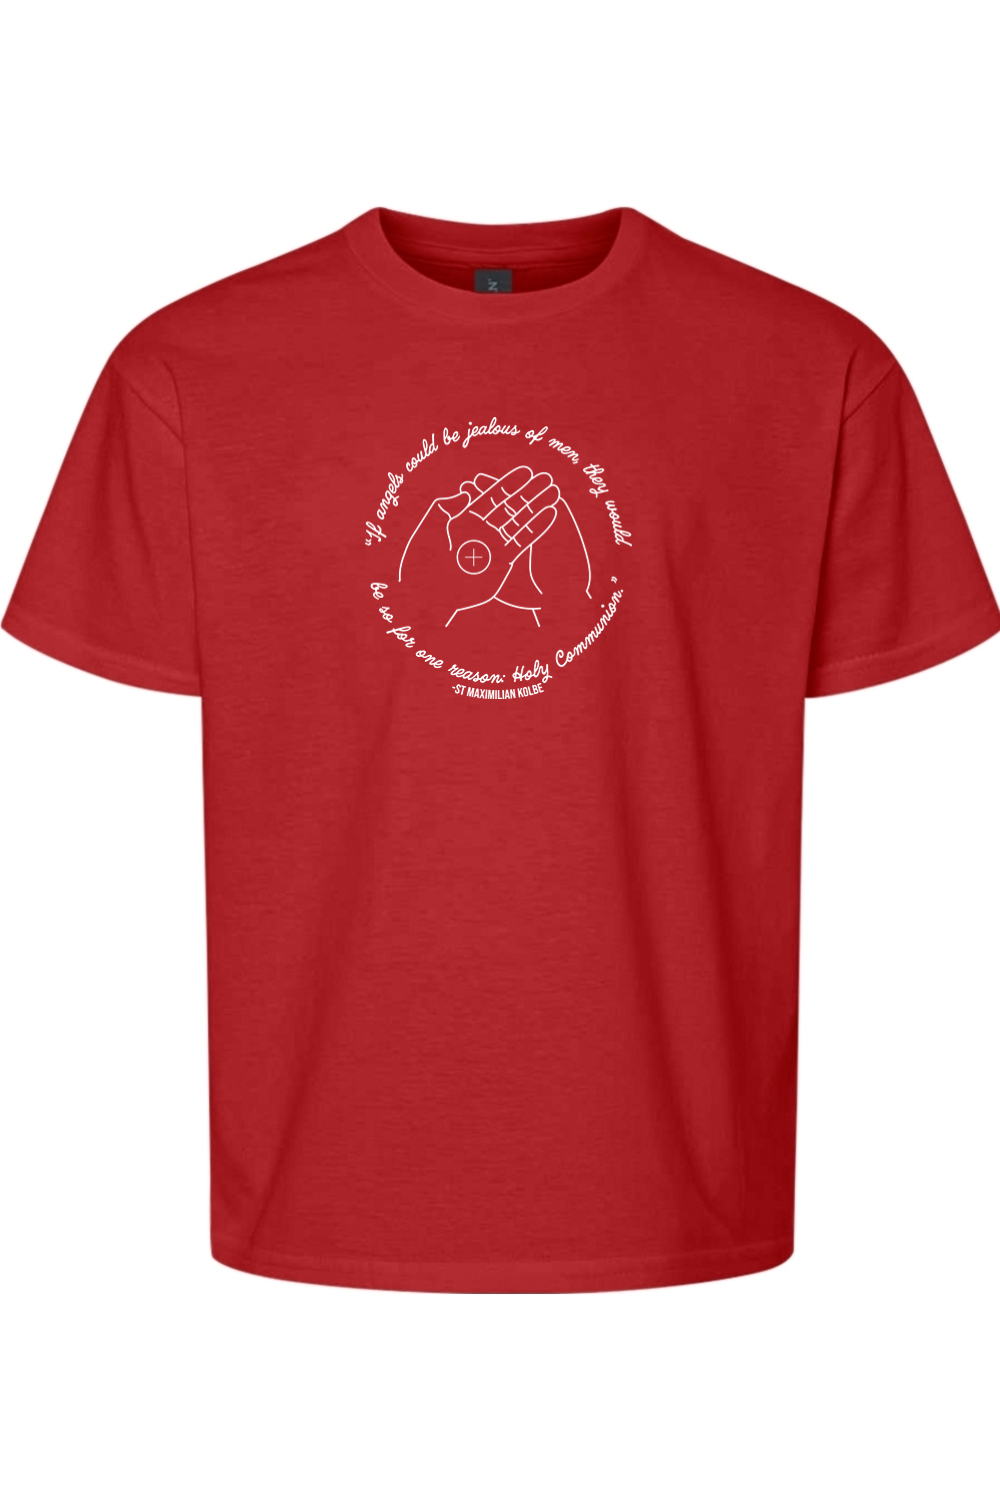 If Angels Could Be Jealous - St. Maximilian Kolbe Youth T-Shirt